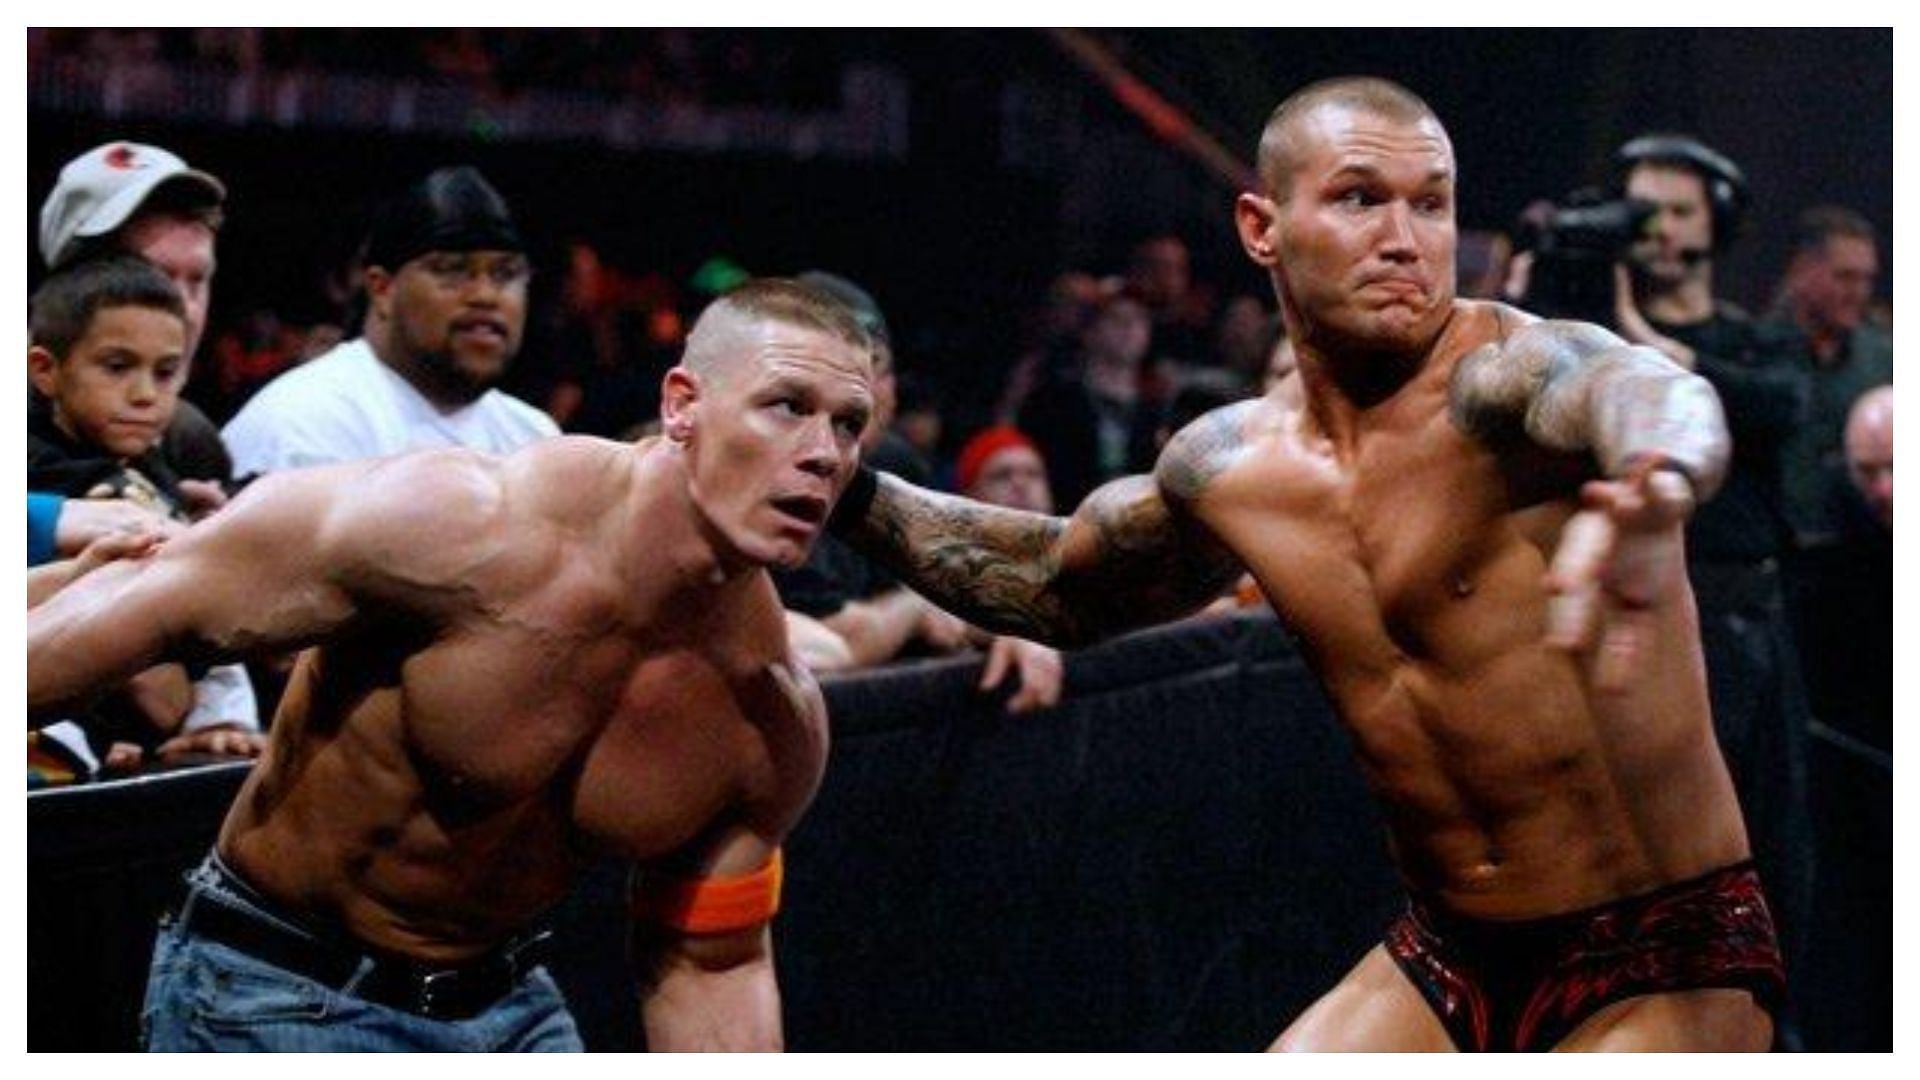 Cena and Orton had one of the greatest rivalries of the last 20 years